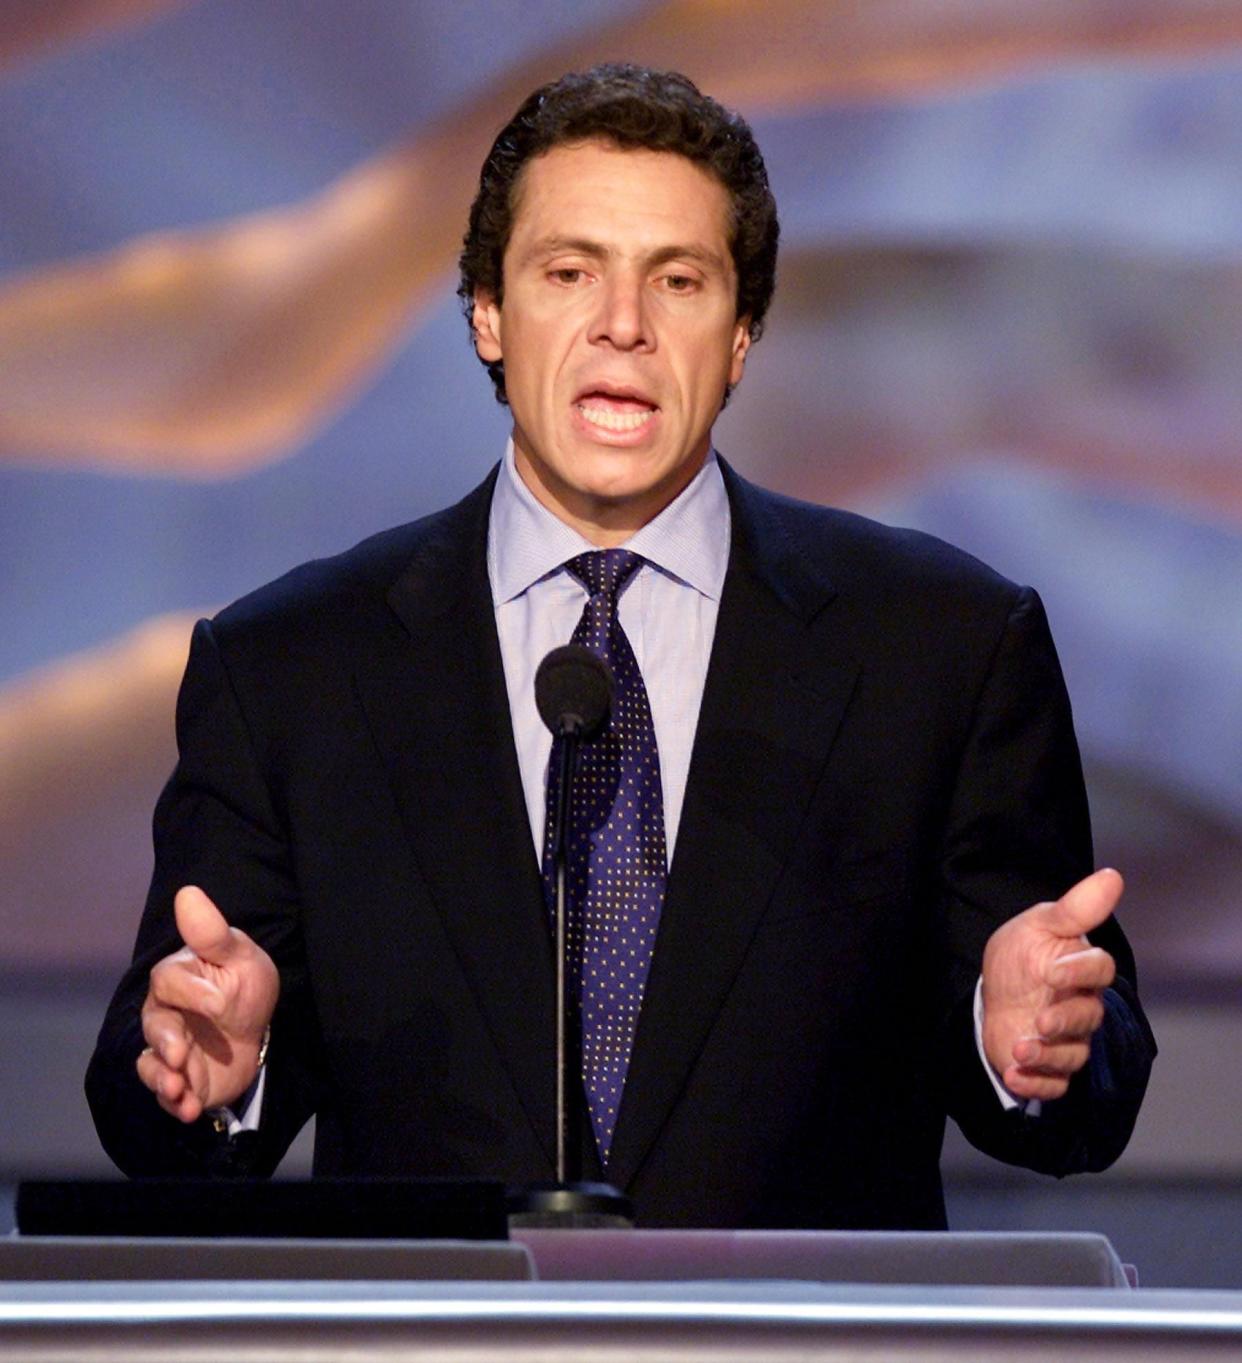 US Secretary of Housing and Urban Development Andrew Cuomo addresses the Democratic National Convention on its fourth and final day in August 2000 in Los Angeles, Calif.